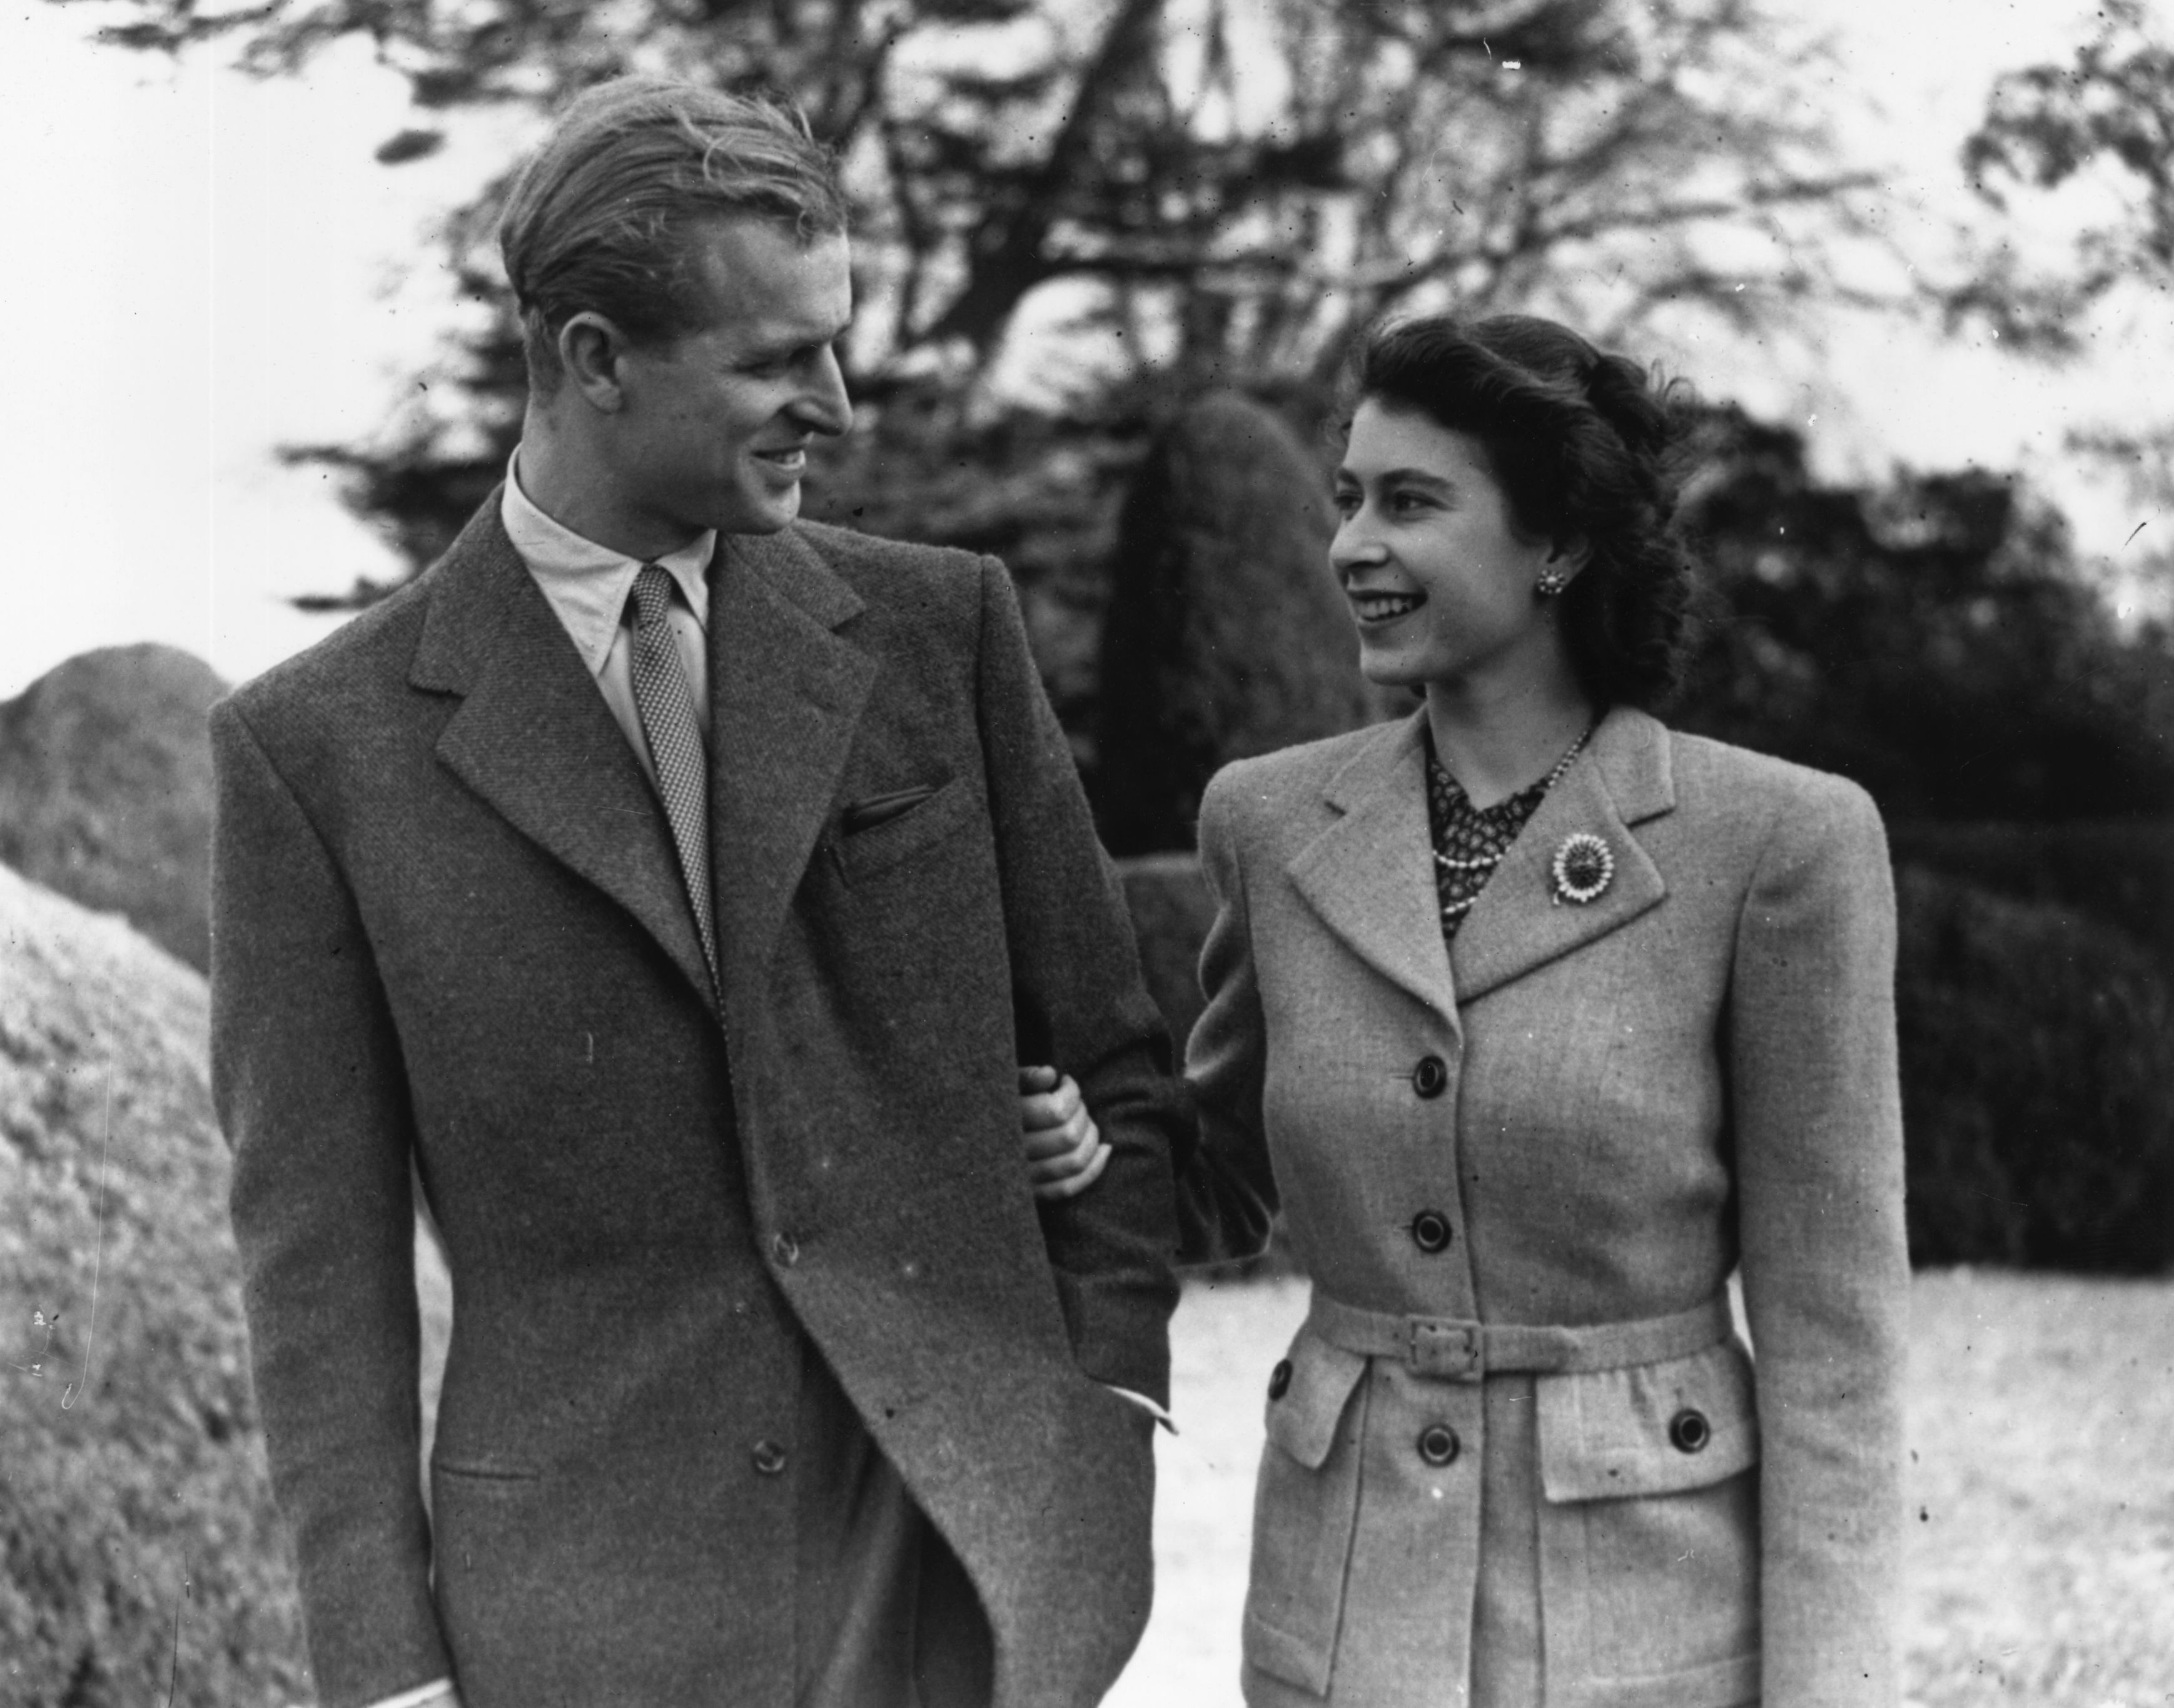 Princess Elizabeth and Prince Philip during their honeymoon at Broadlands, Romsey, Hampshire in 1947 | Source: Getty Images